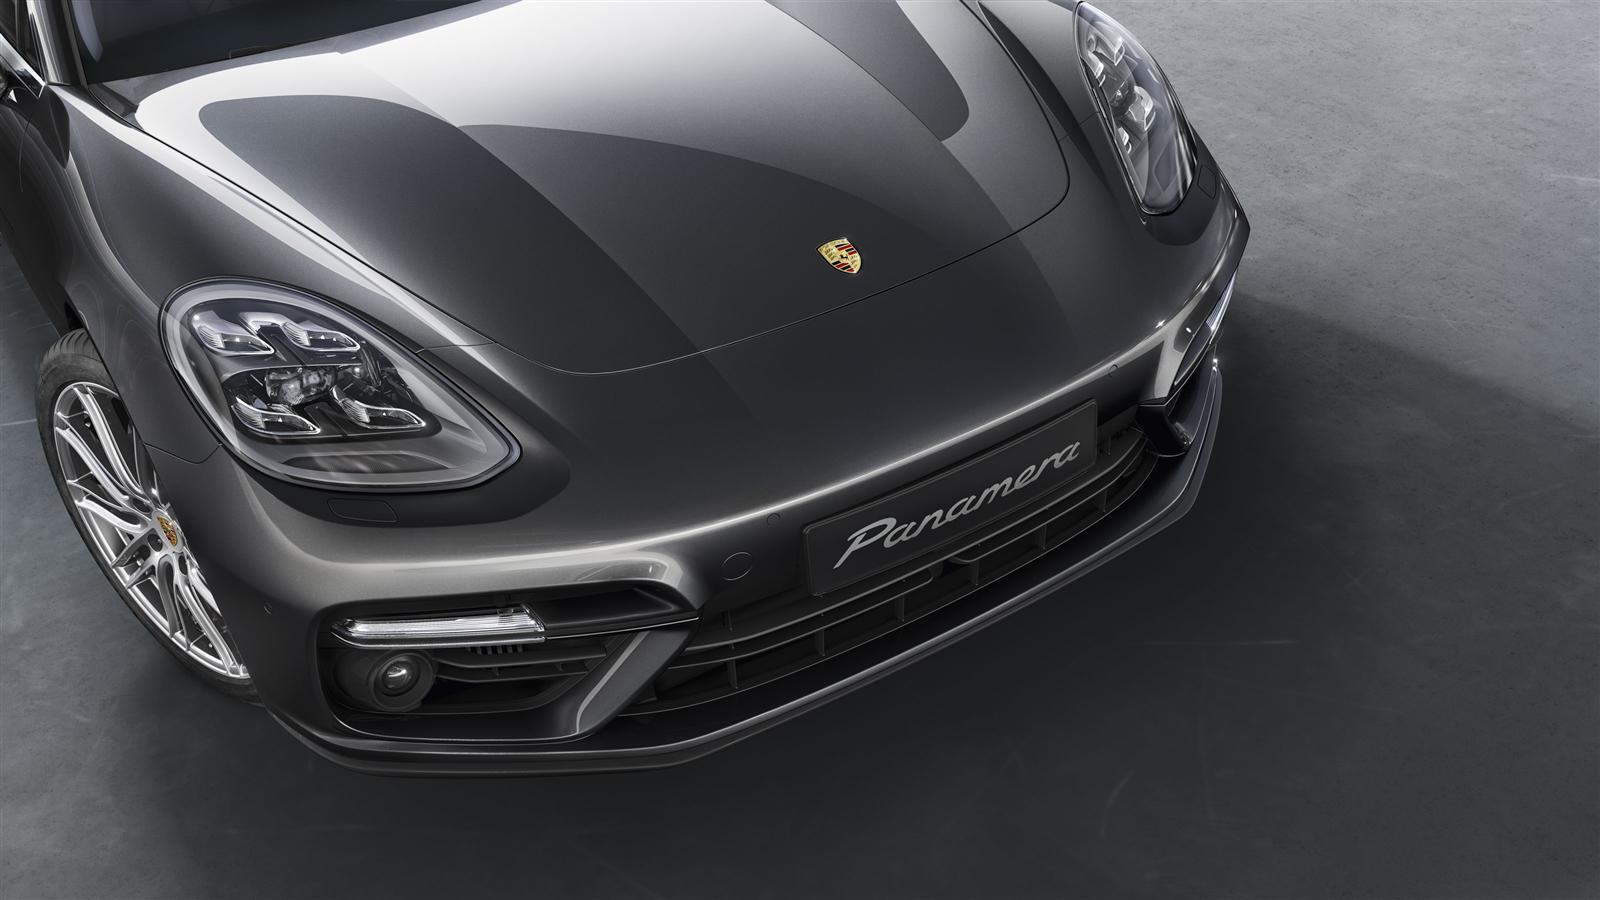 Second Gen Porsche Panamera To Be Launched In India In March